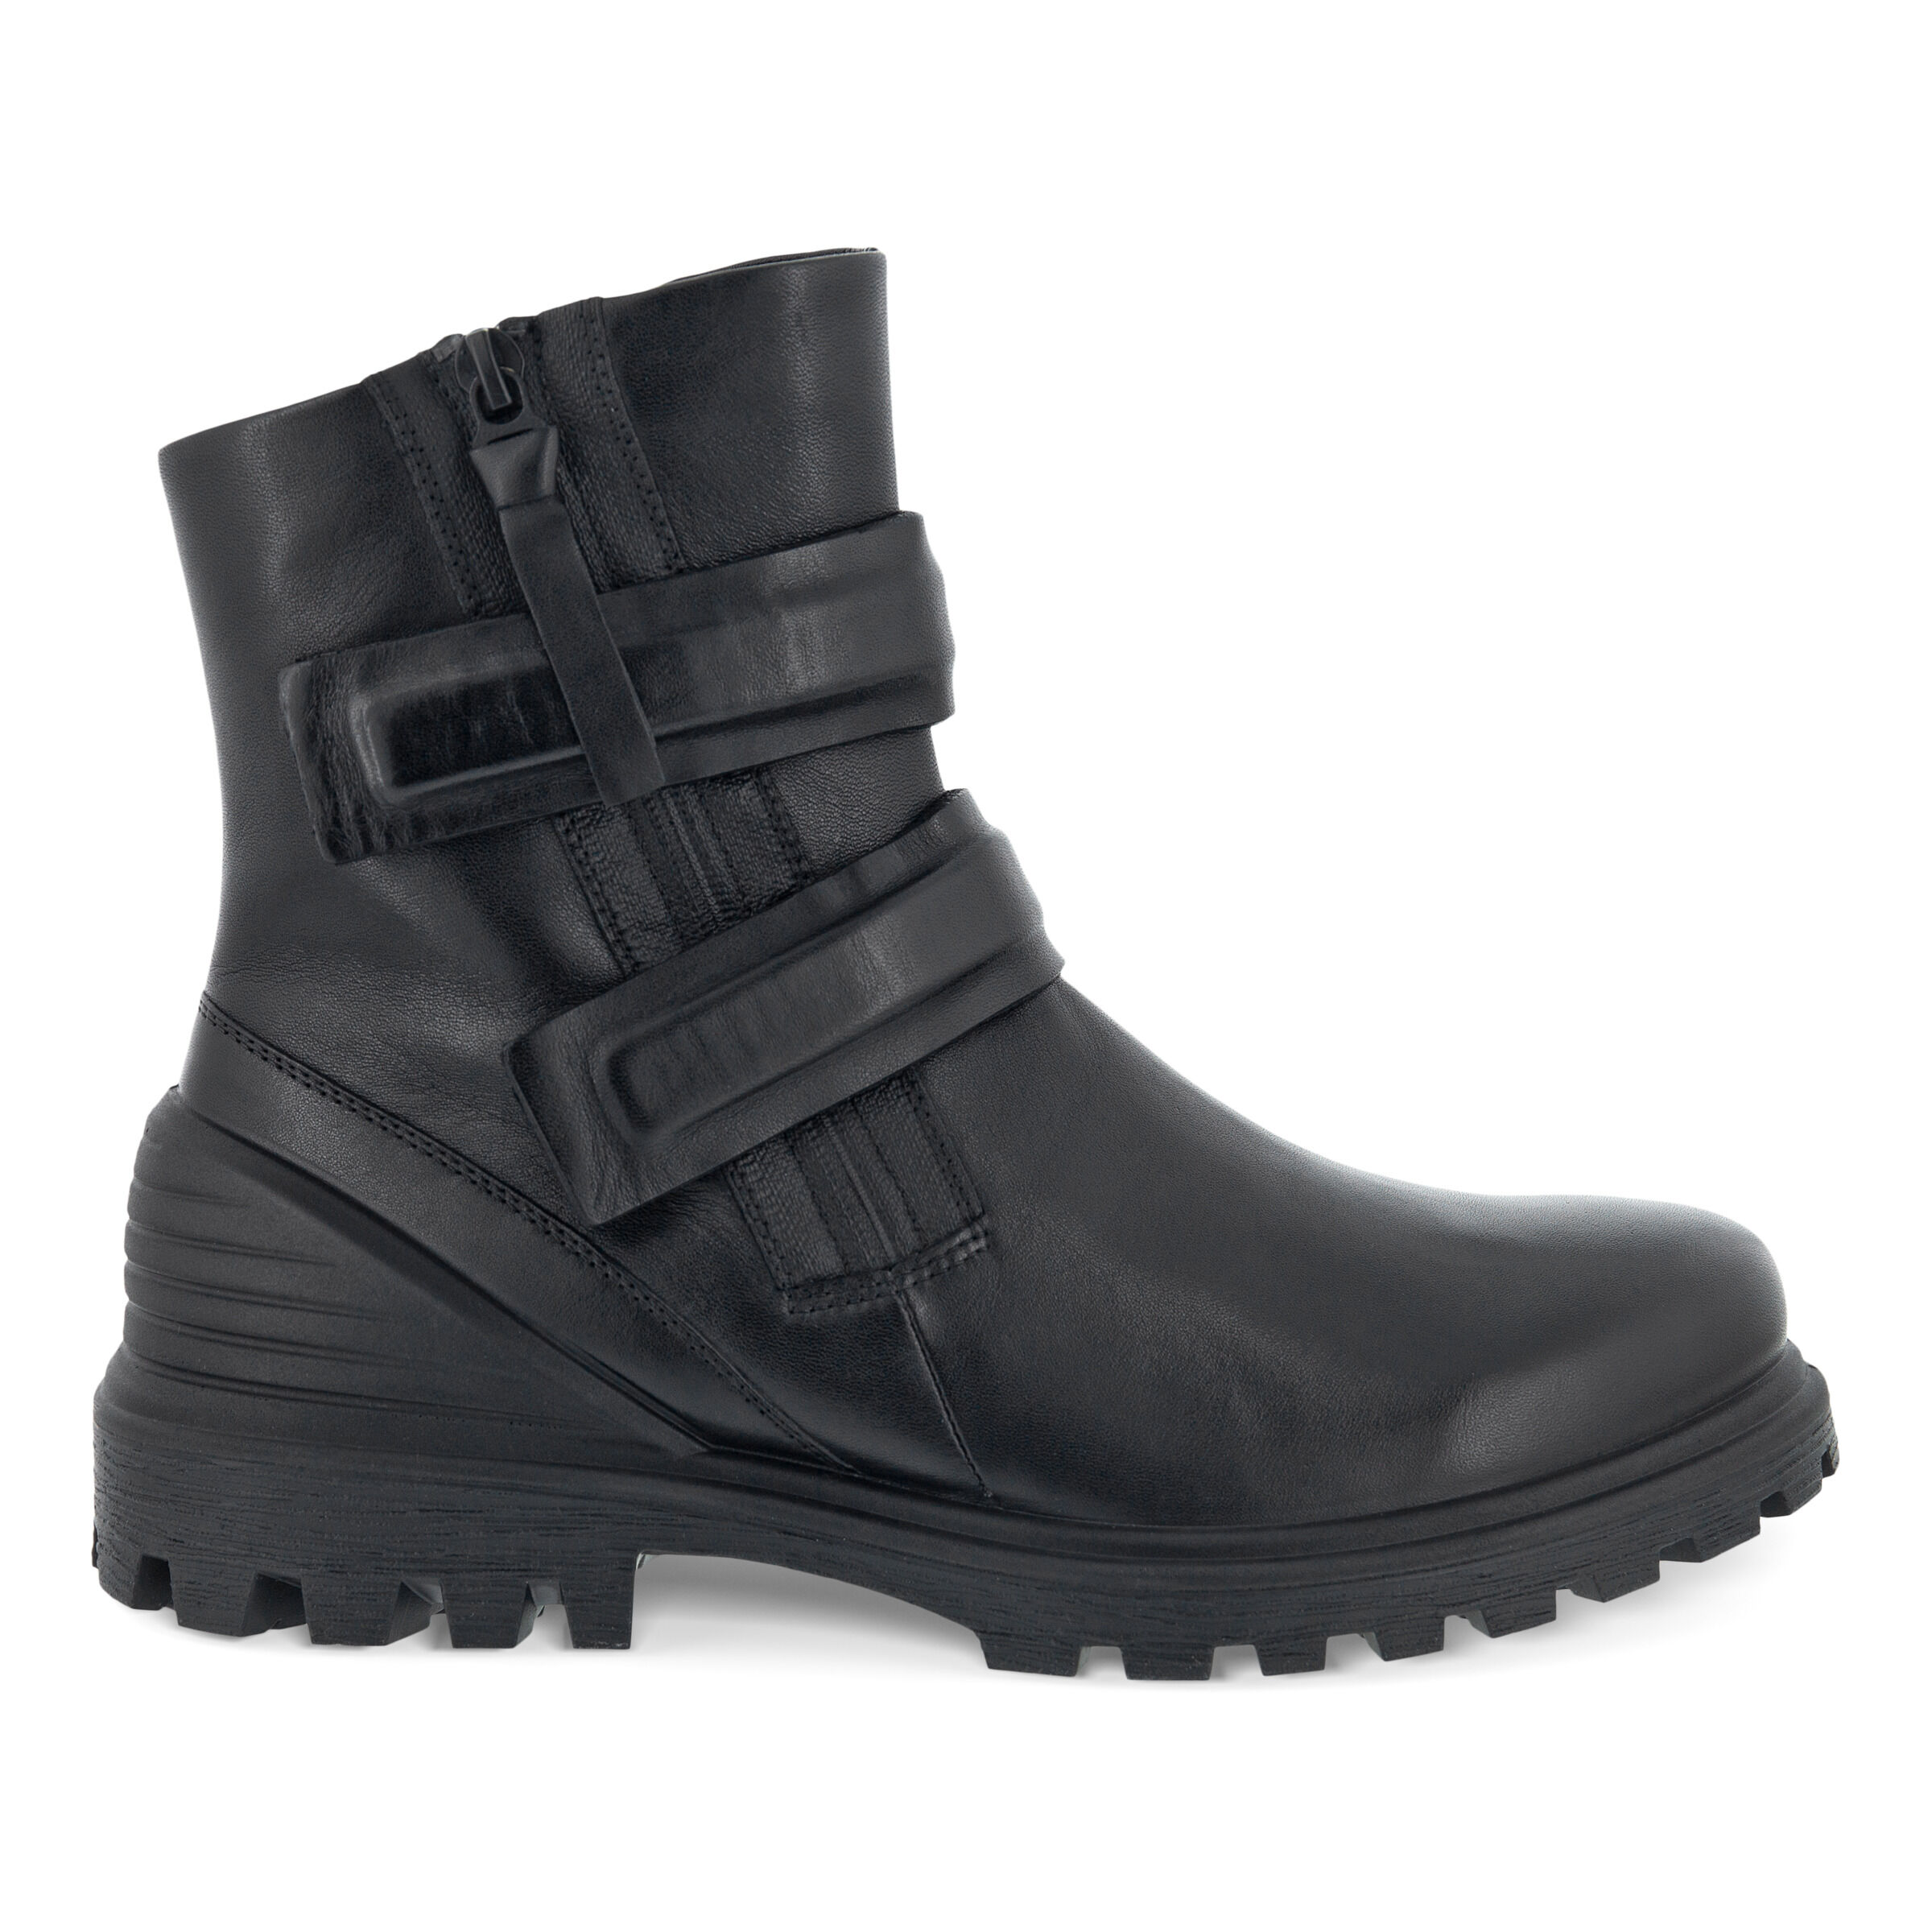 Explore our boots for women | Official 